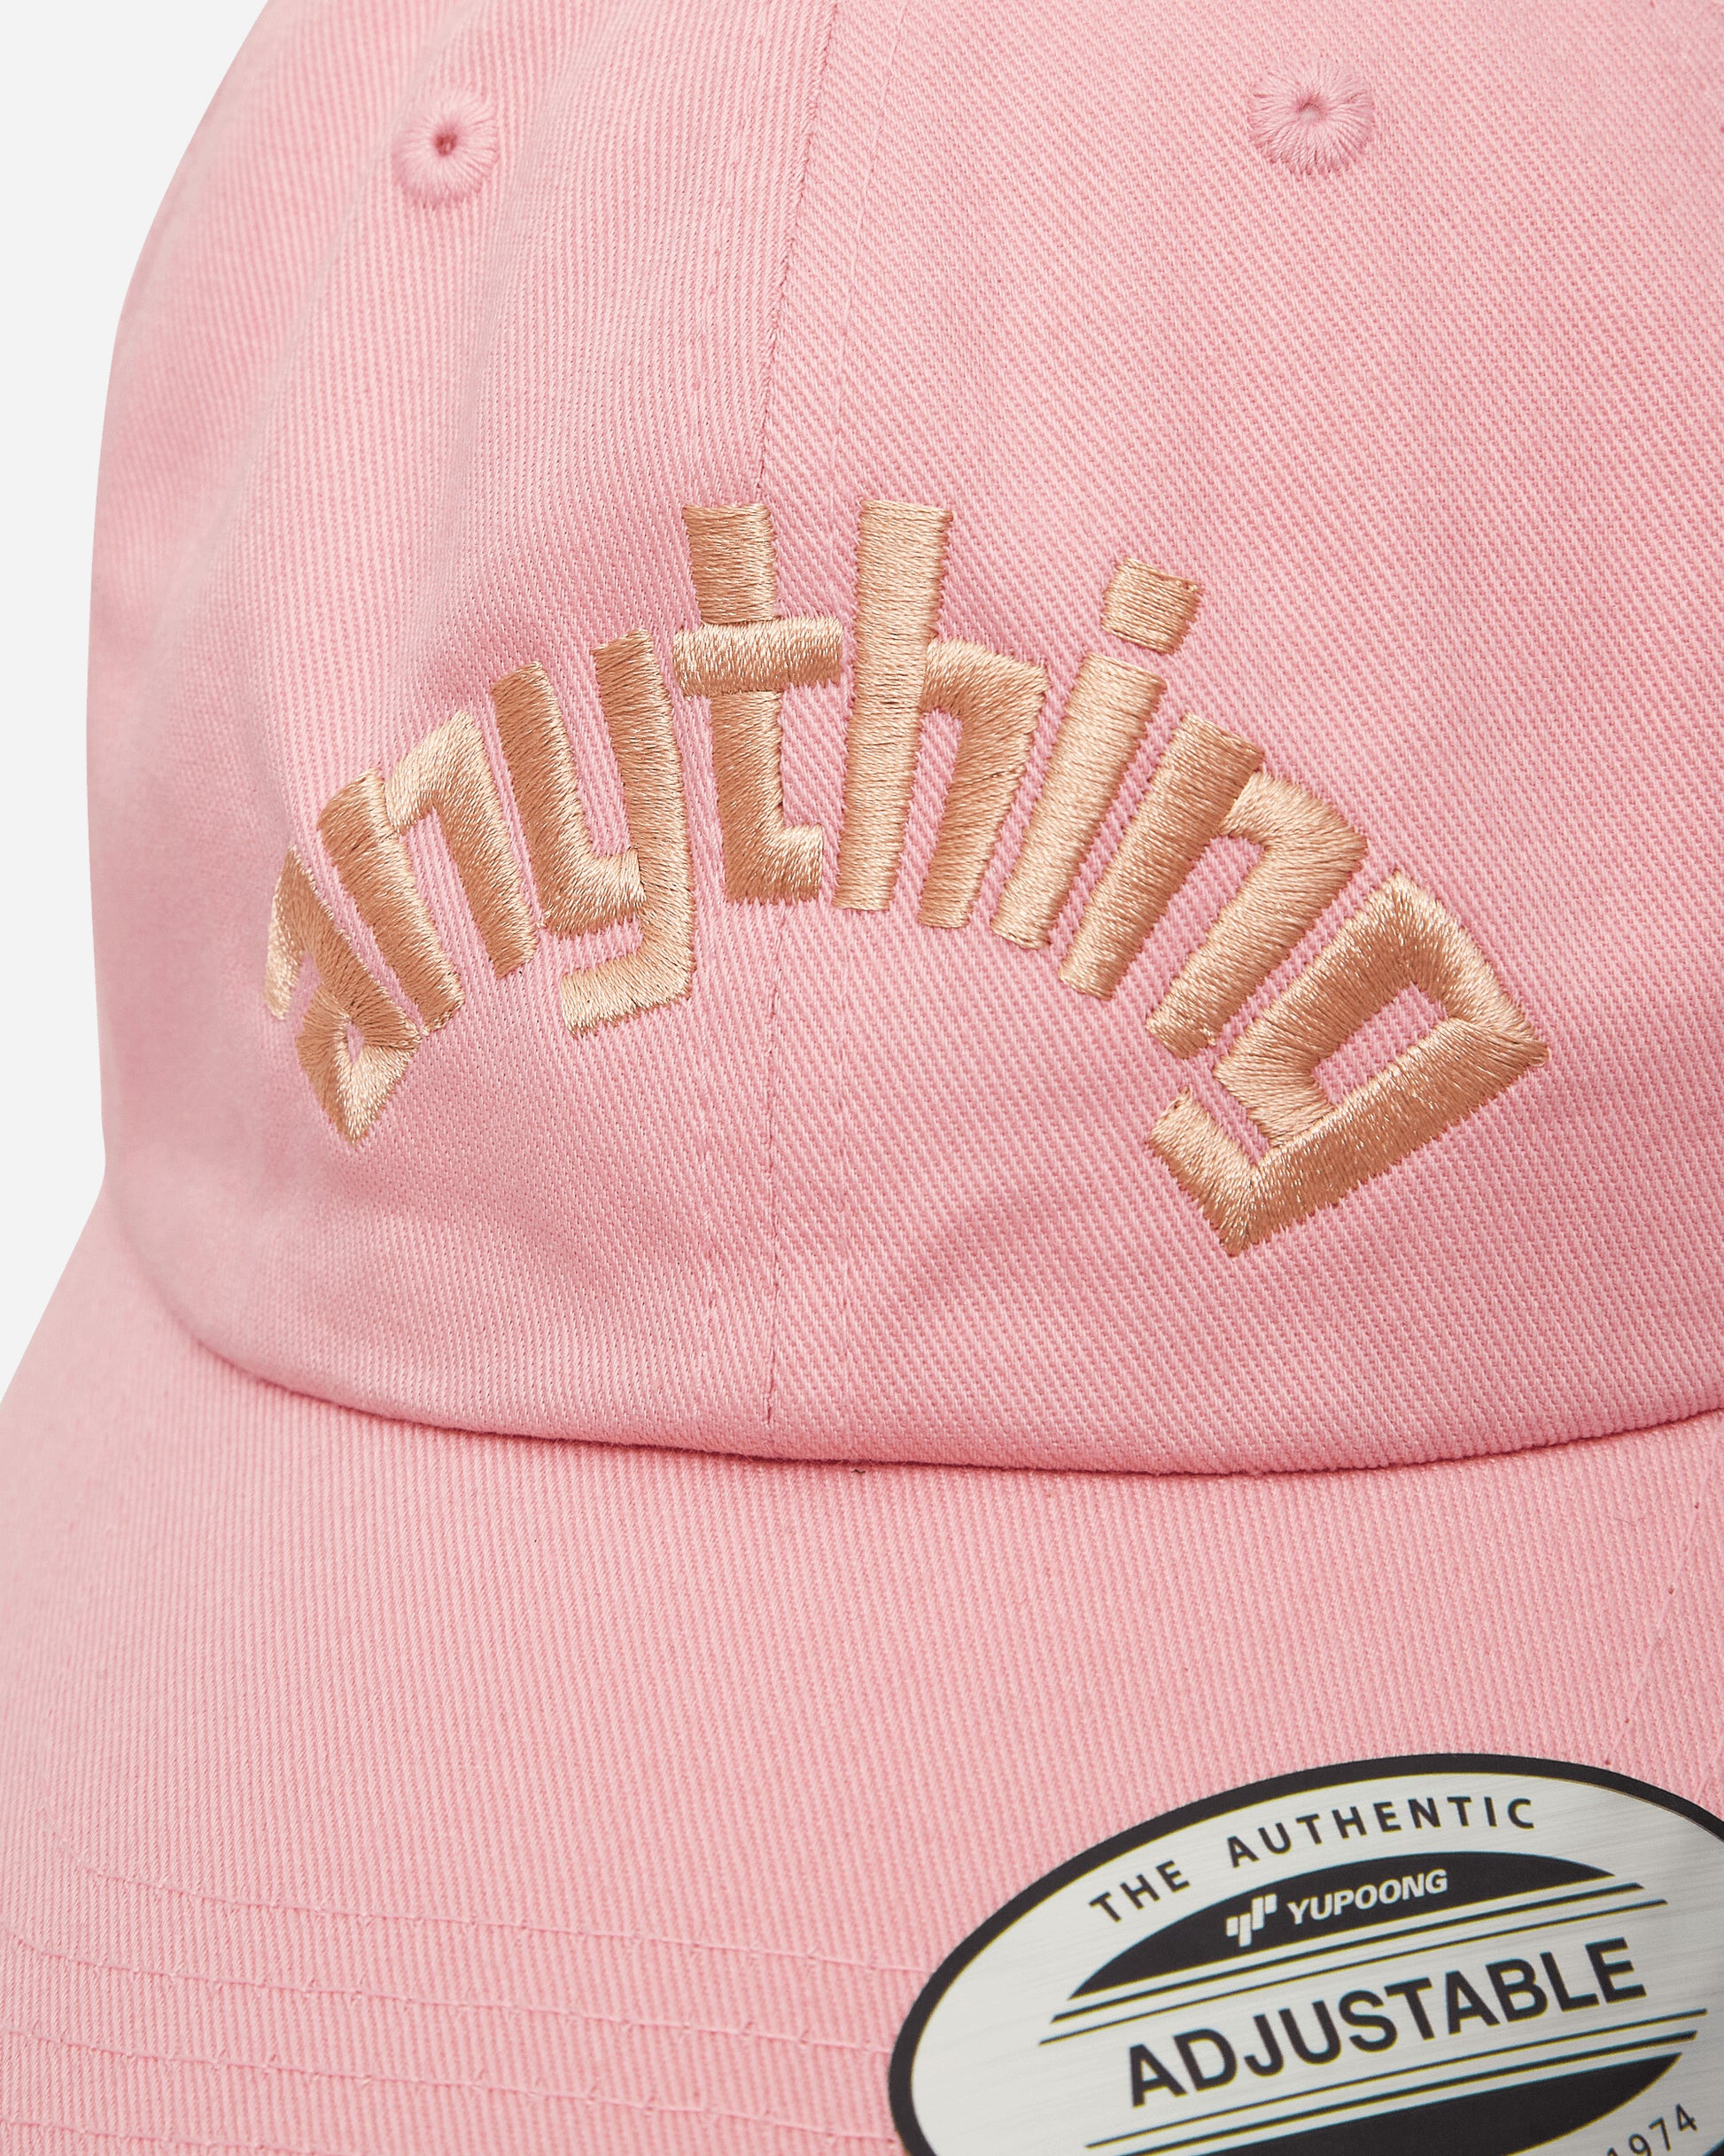 aNYthing Curved Logo Dad Hat Pink Hats Caps ANY-102 PK